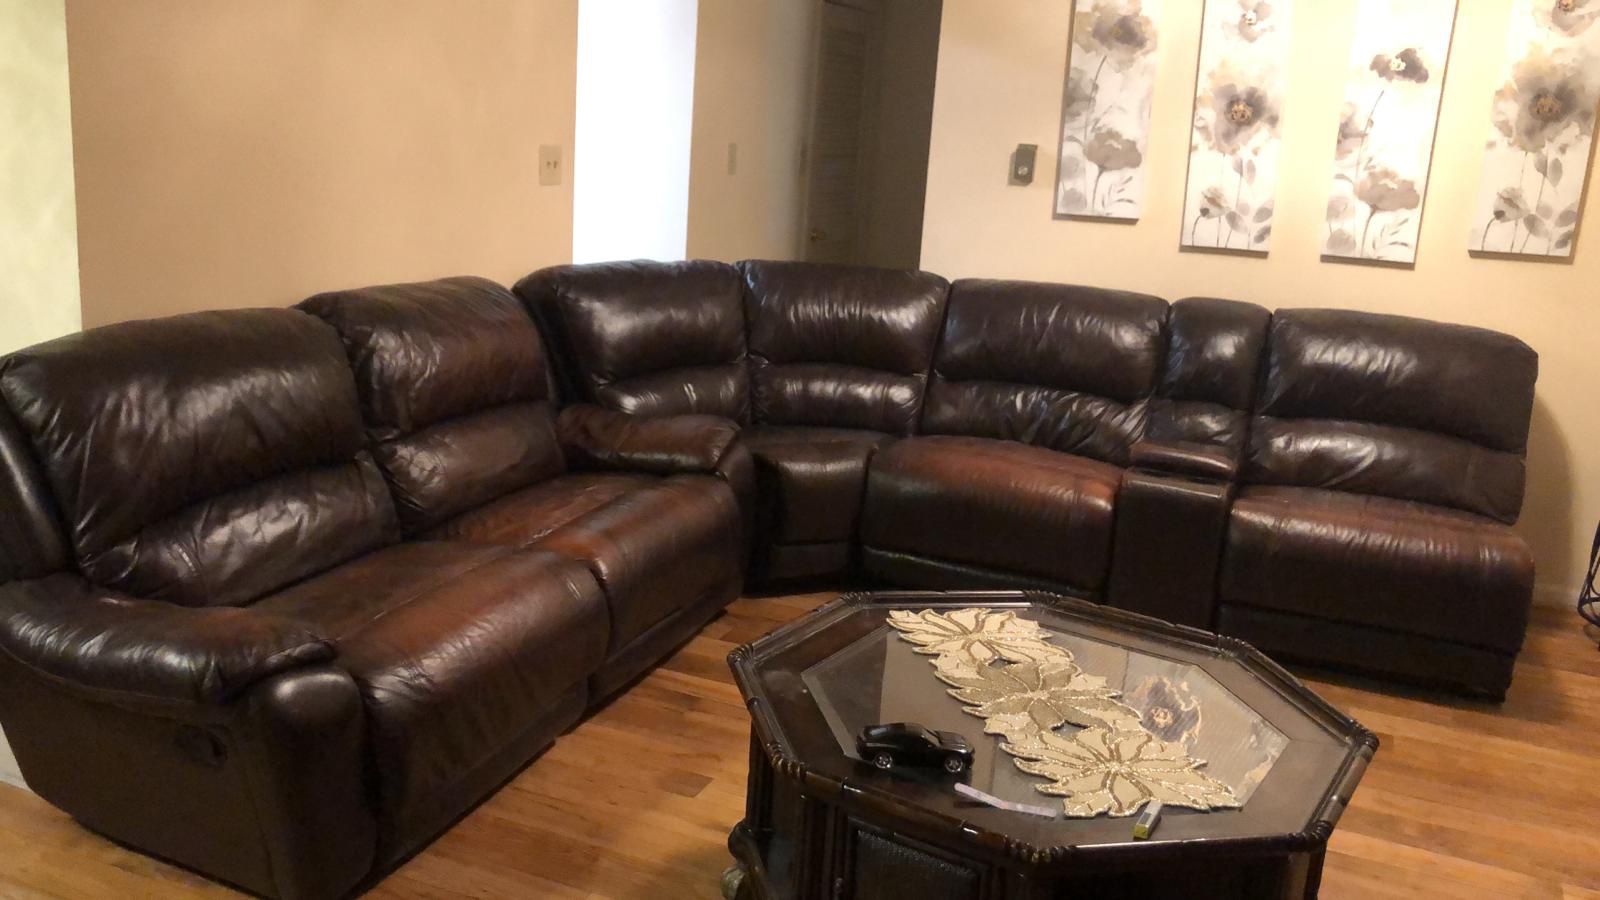 Quality Genuine Leather Sofa Set - $699 or Best Offer!